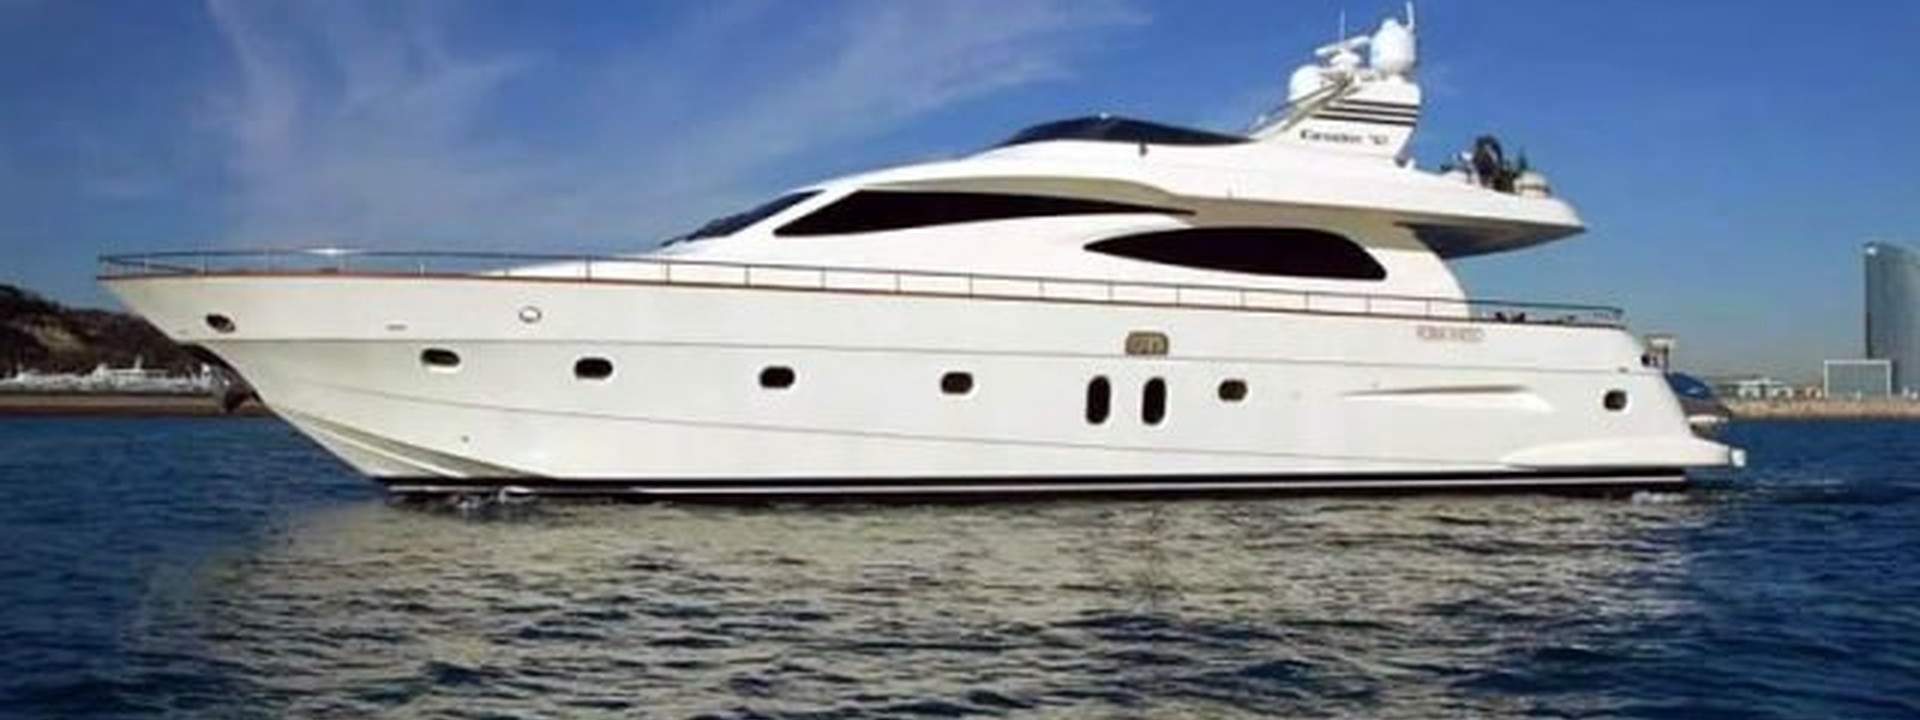 Luxury Yacht Canados 72